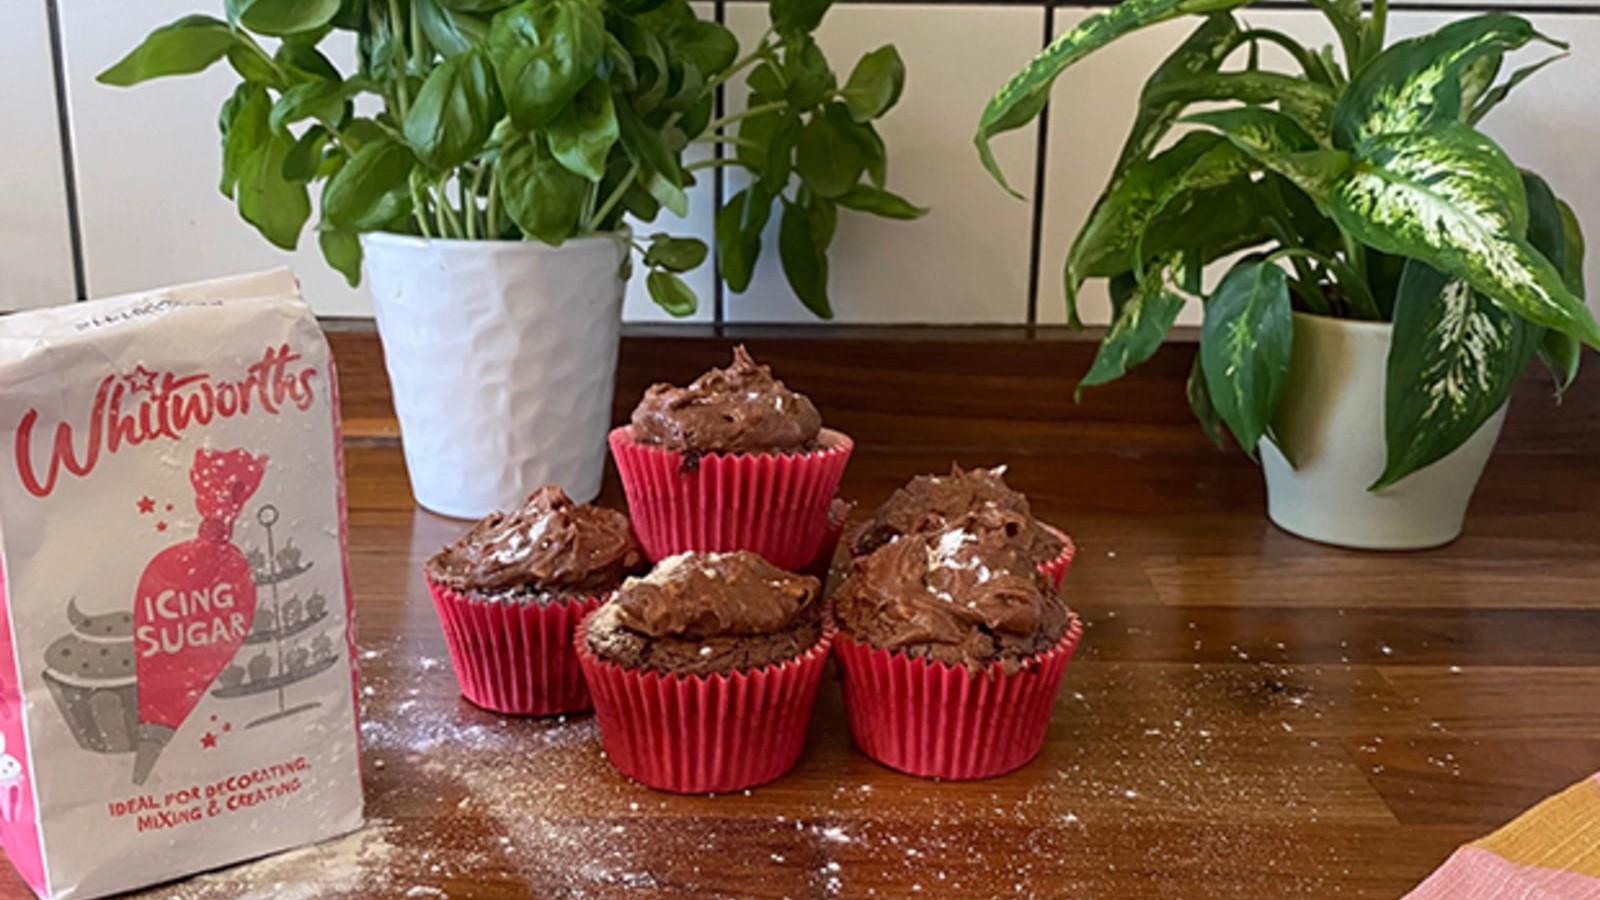 Image of Vegan Chocolate Cupcakes with Peanut Butter Icing